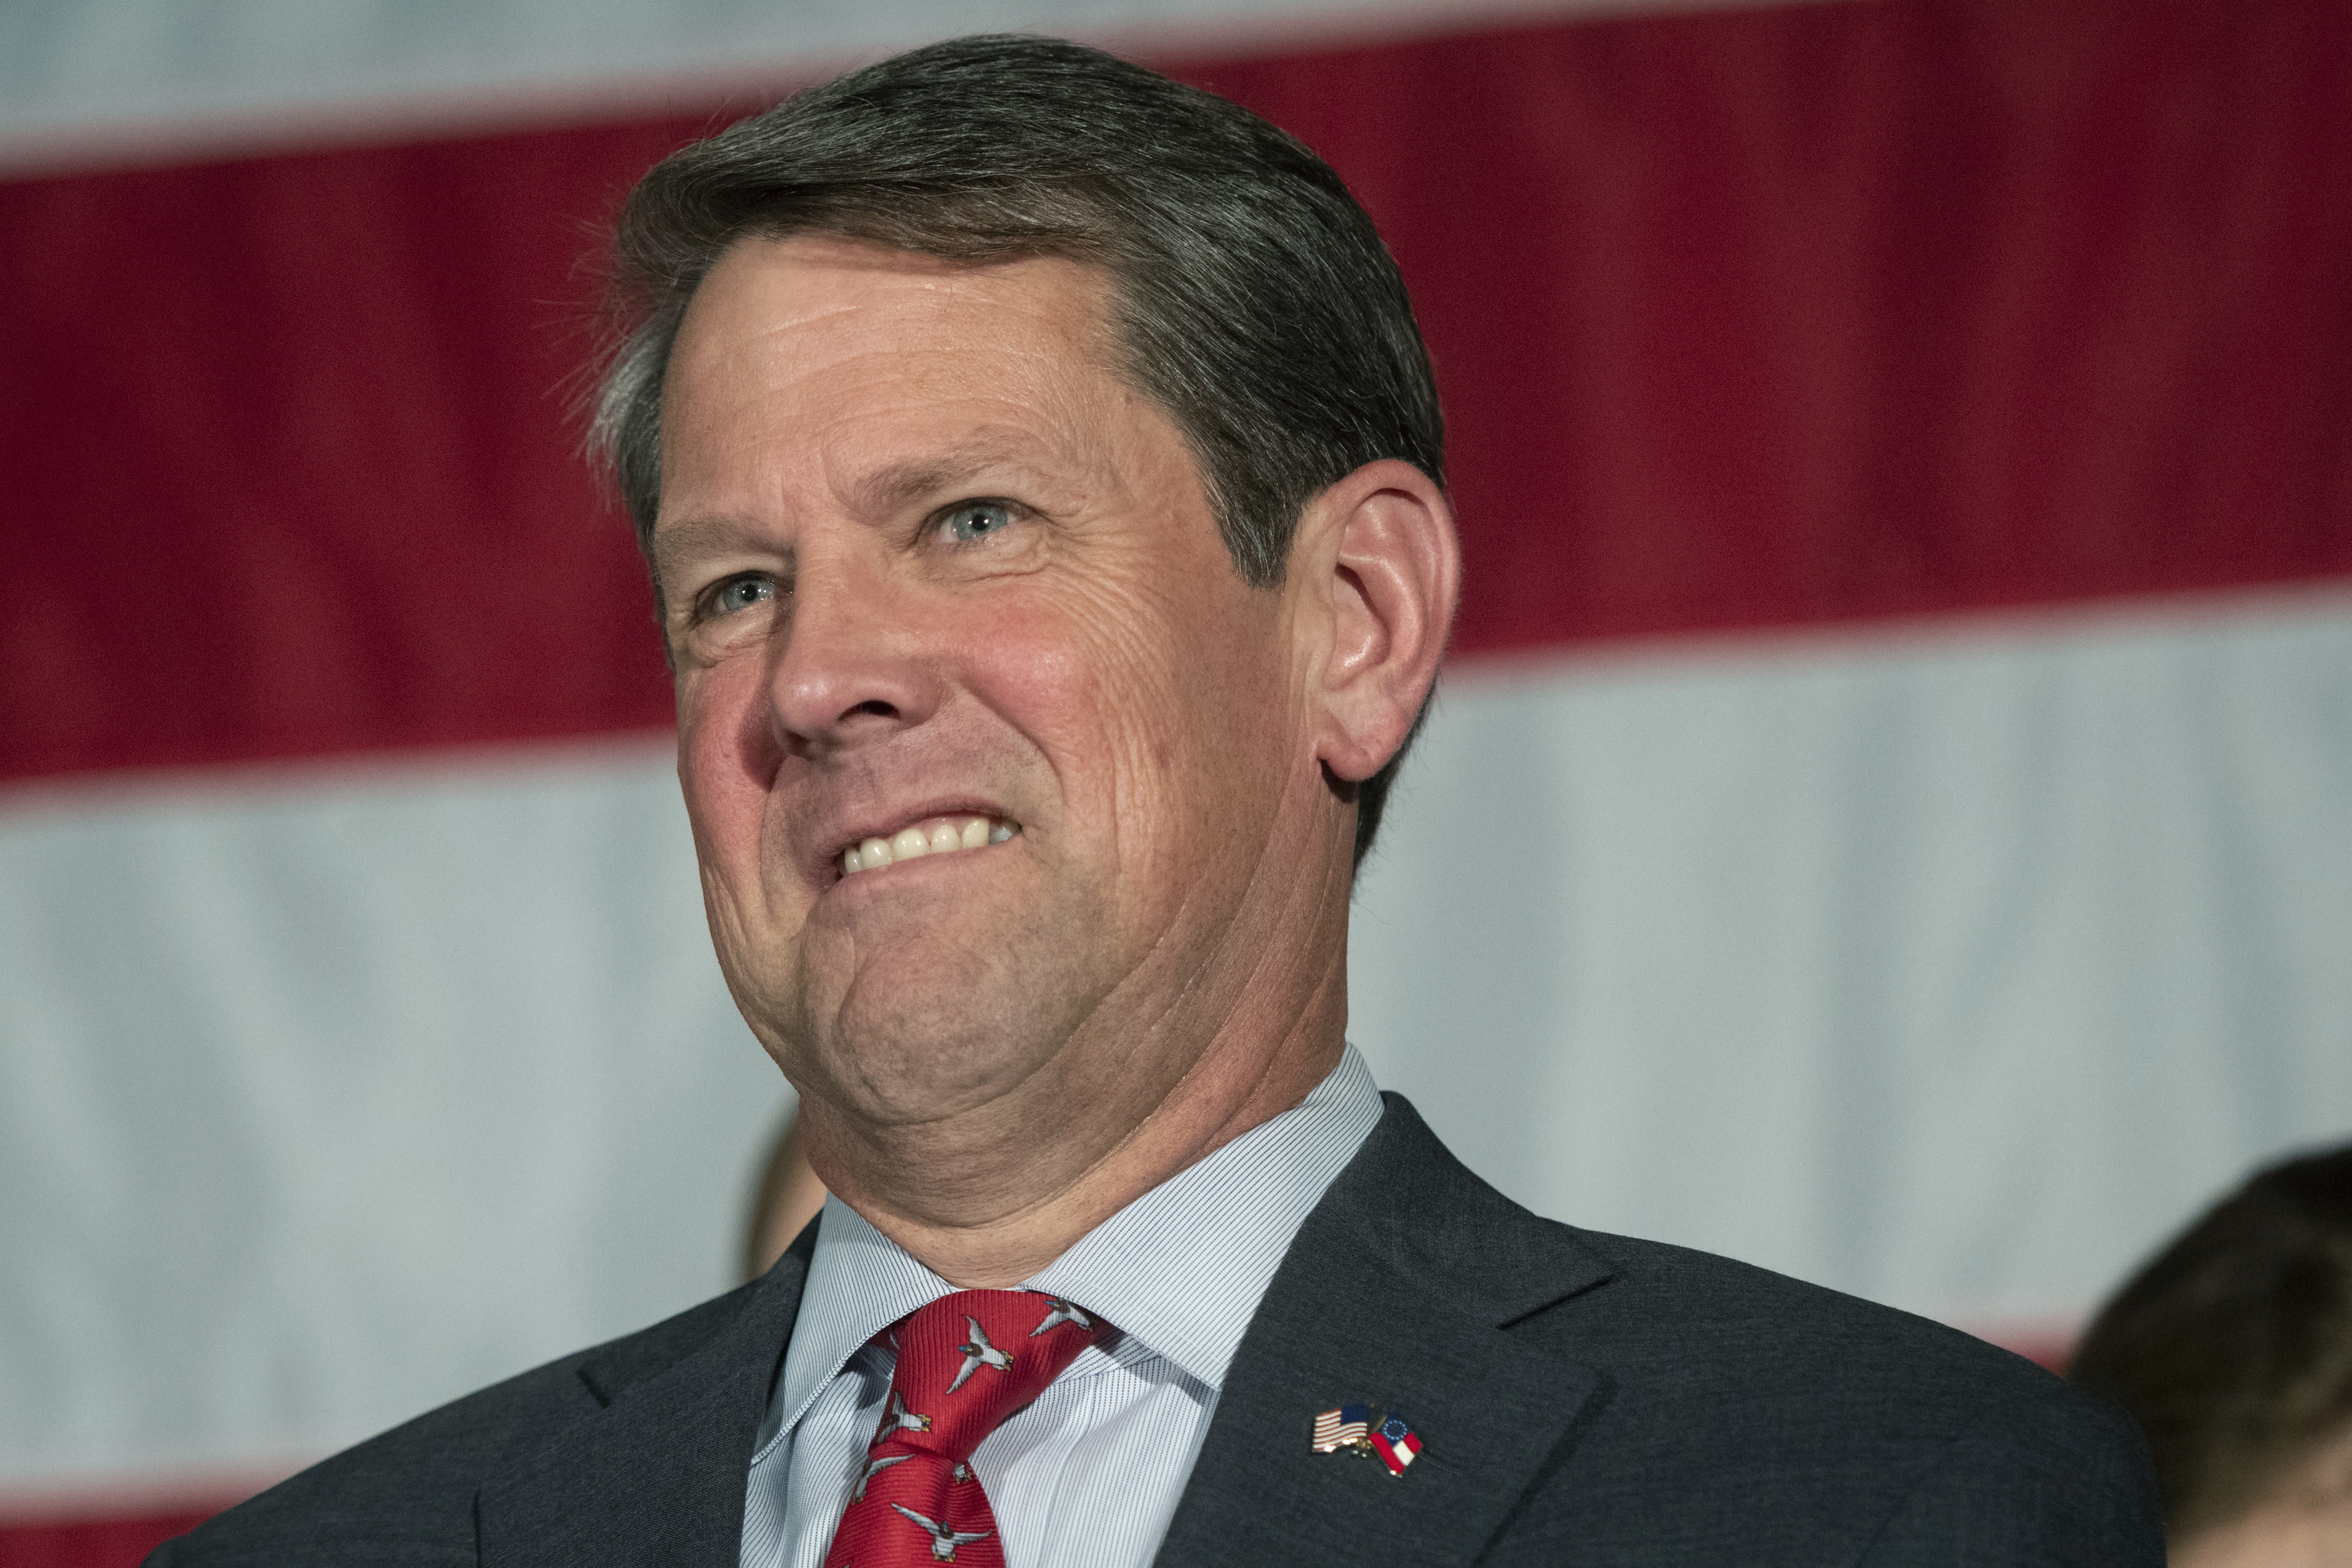 gop-candidate-for-georgia-governor-changes-tone-on-delta-tax